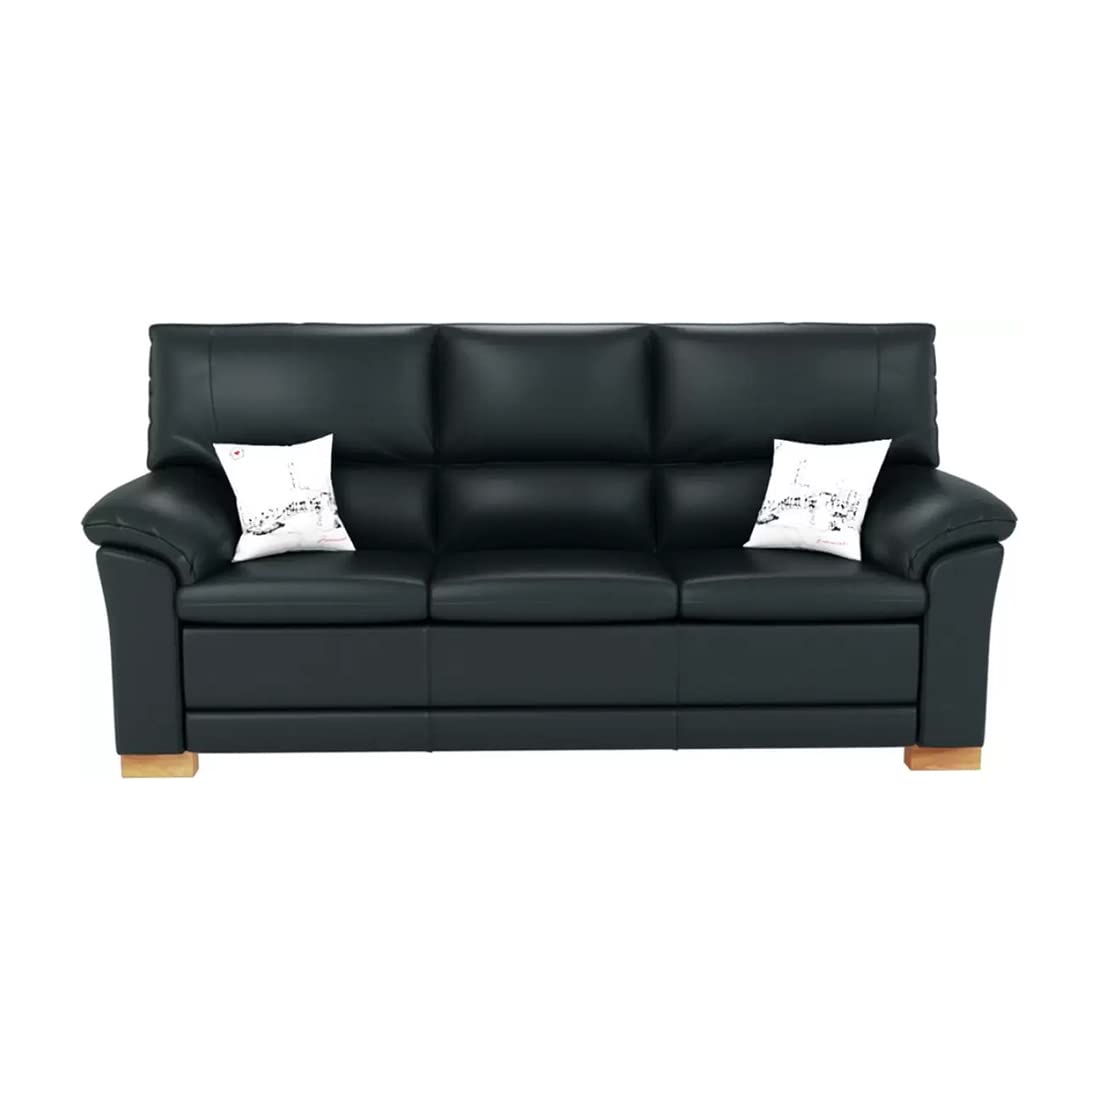 Torque India Milan 3 Seater Leatherette Sofa | Furniture for Living Room And Office | 3 Seater Leatherette Sofa - Torque India